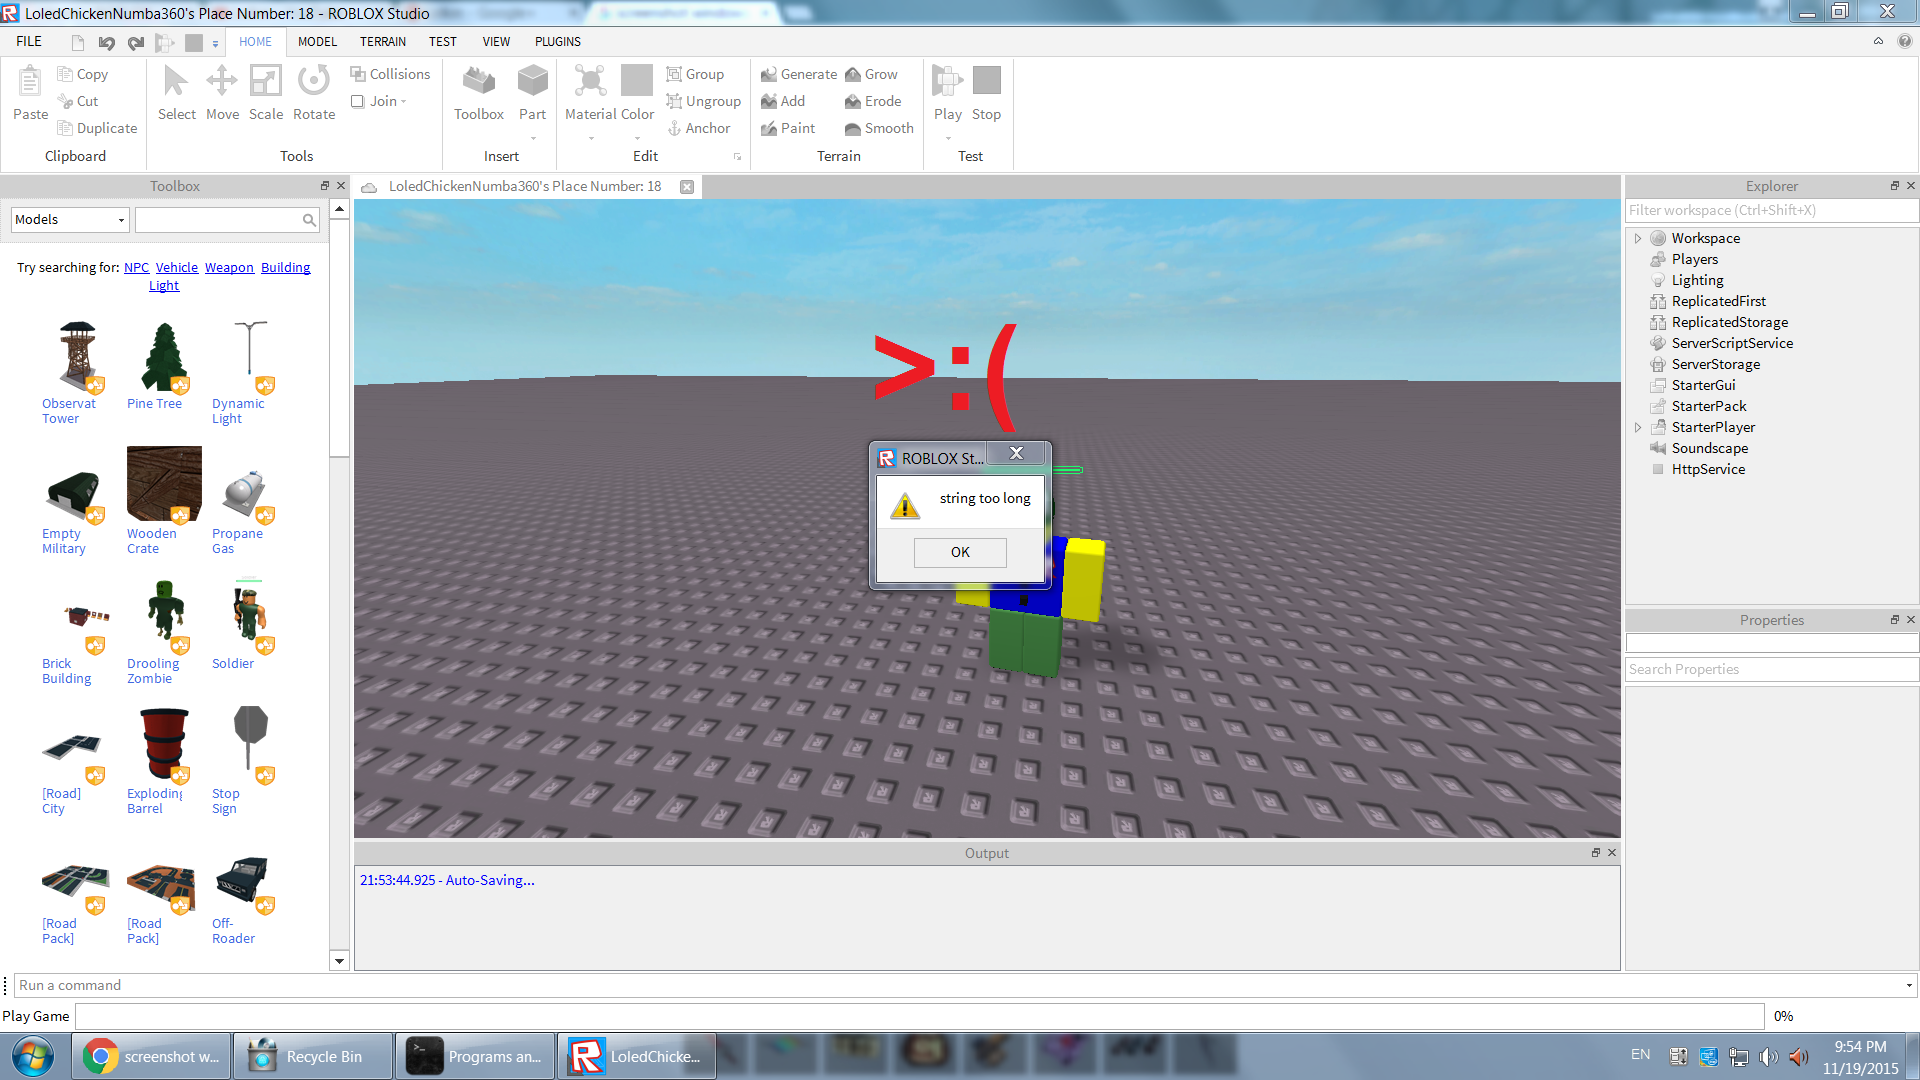 how to make sign in roblox studio